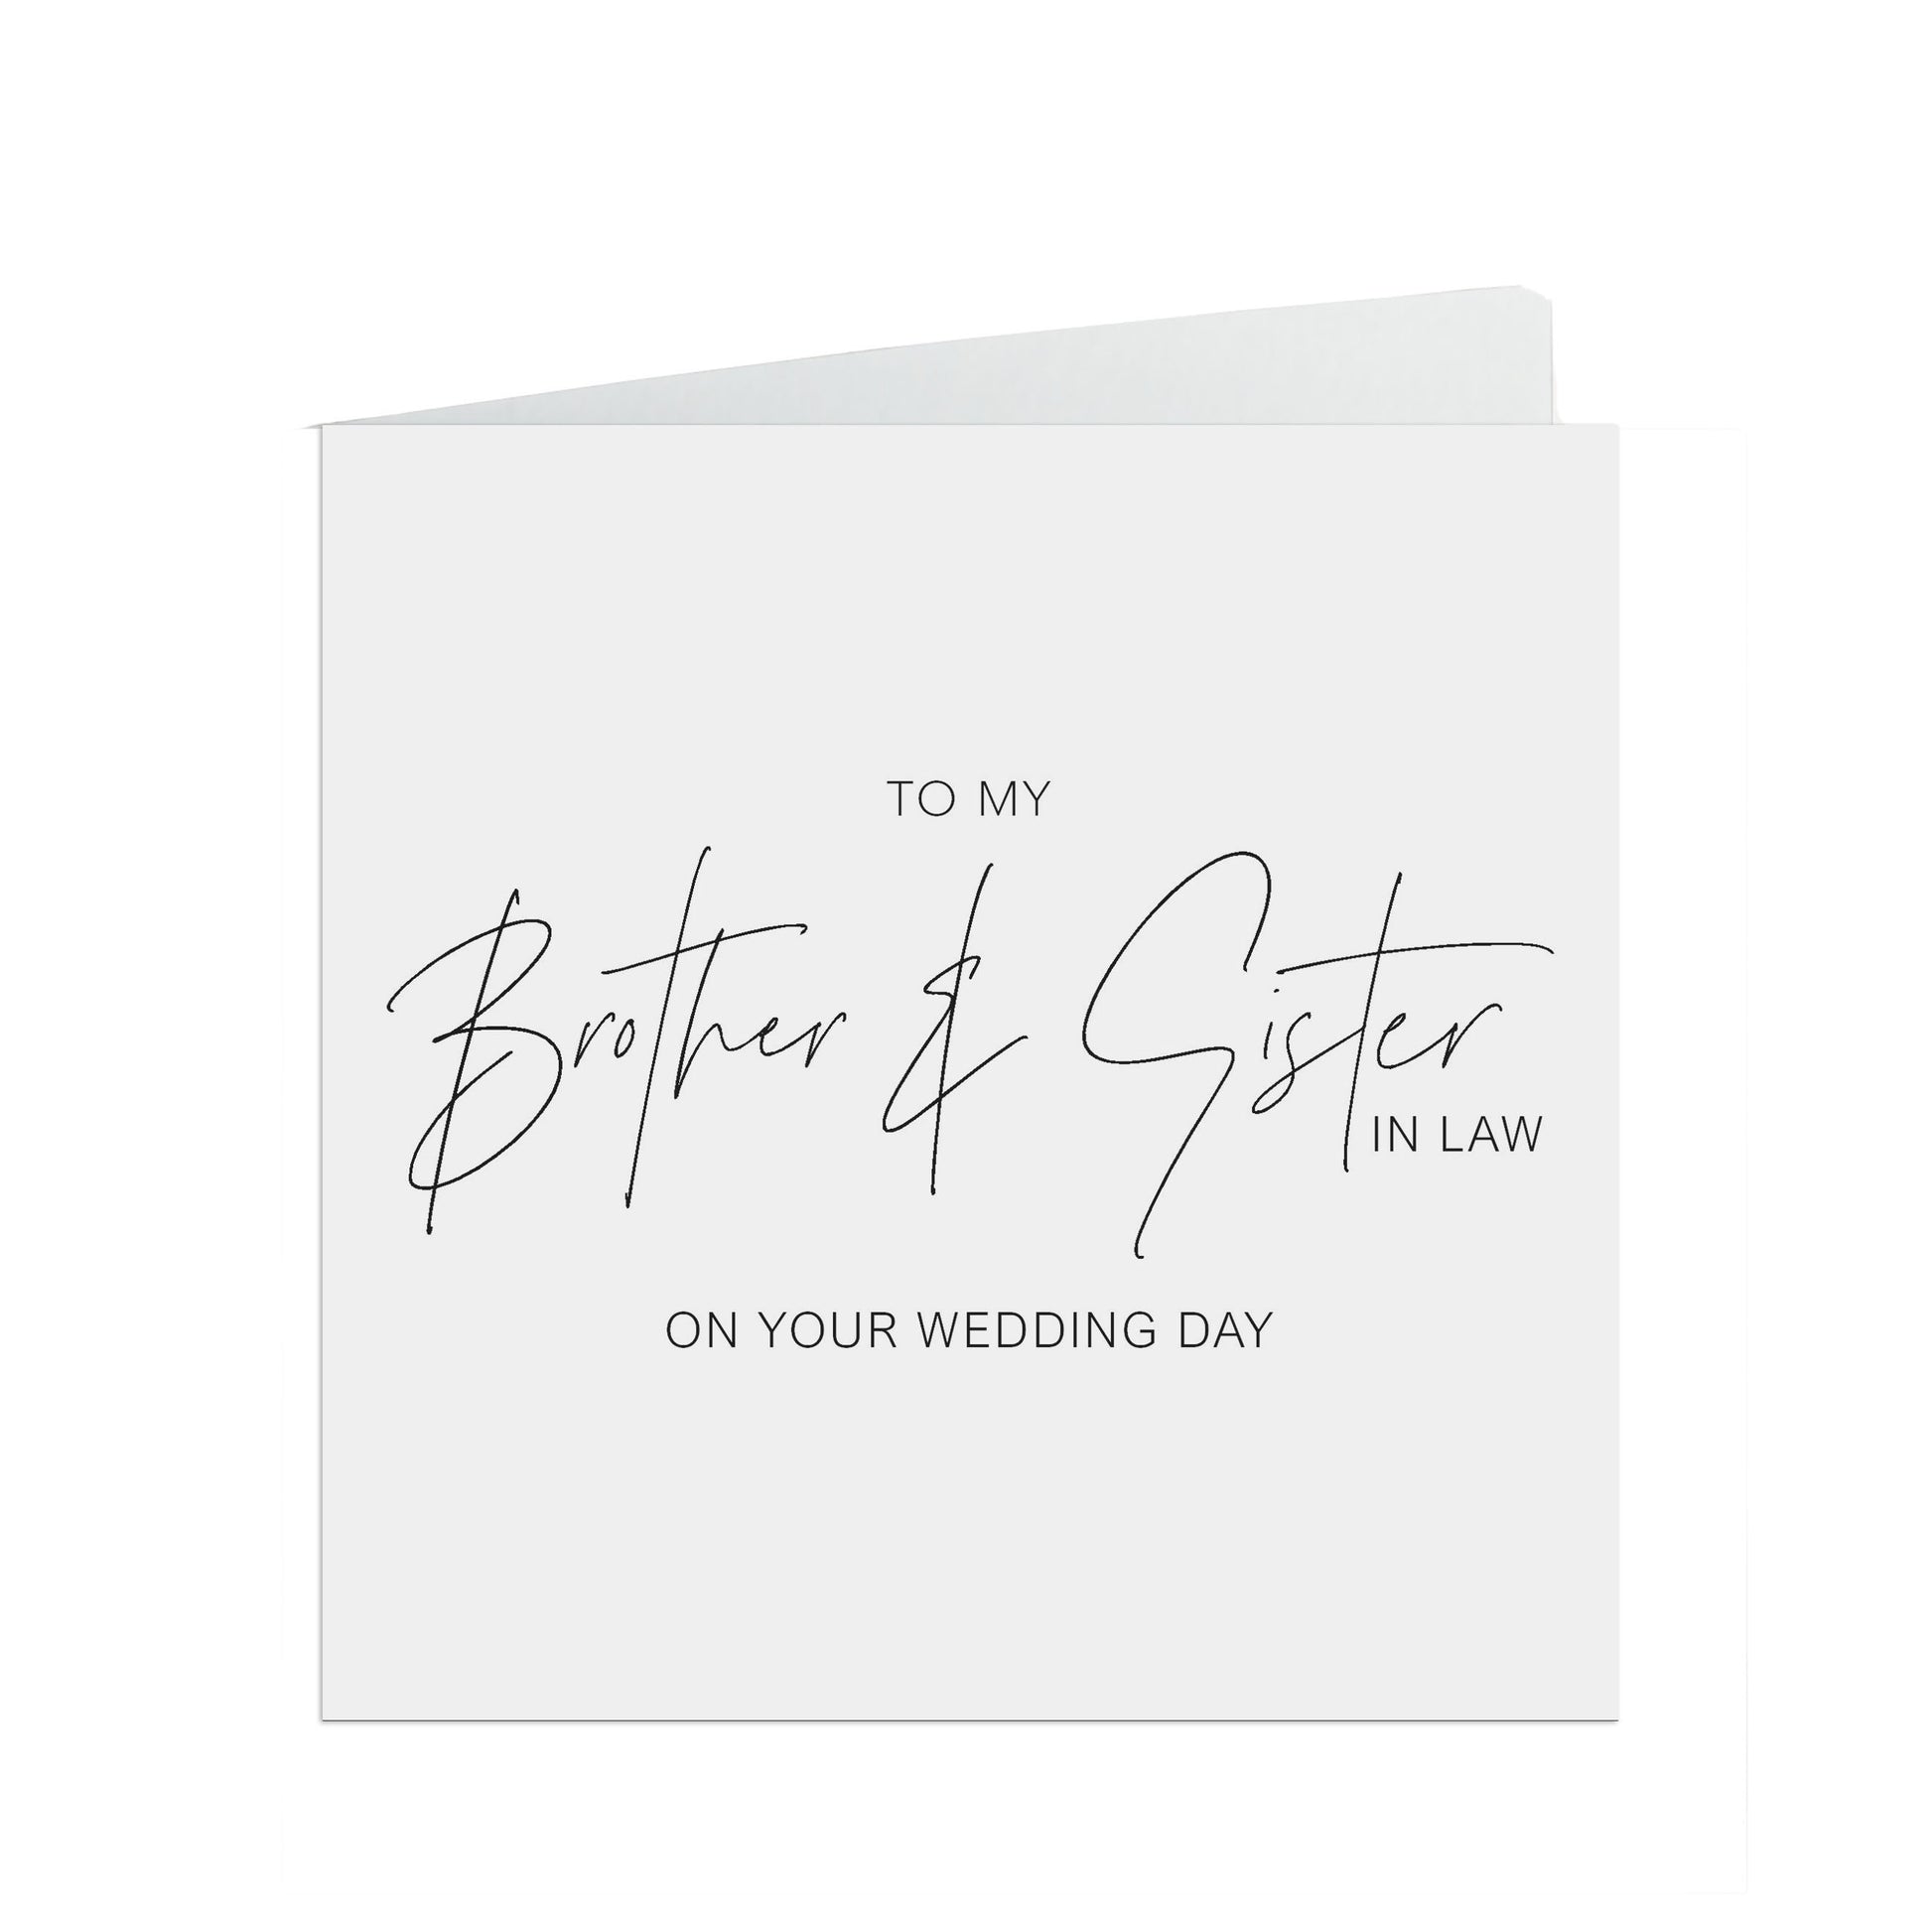 Brother And Sister In Law On Your Wedding Day Card, Elegant Black & White Design, 6x6 Inches In Size With A White Envelope